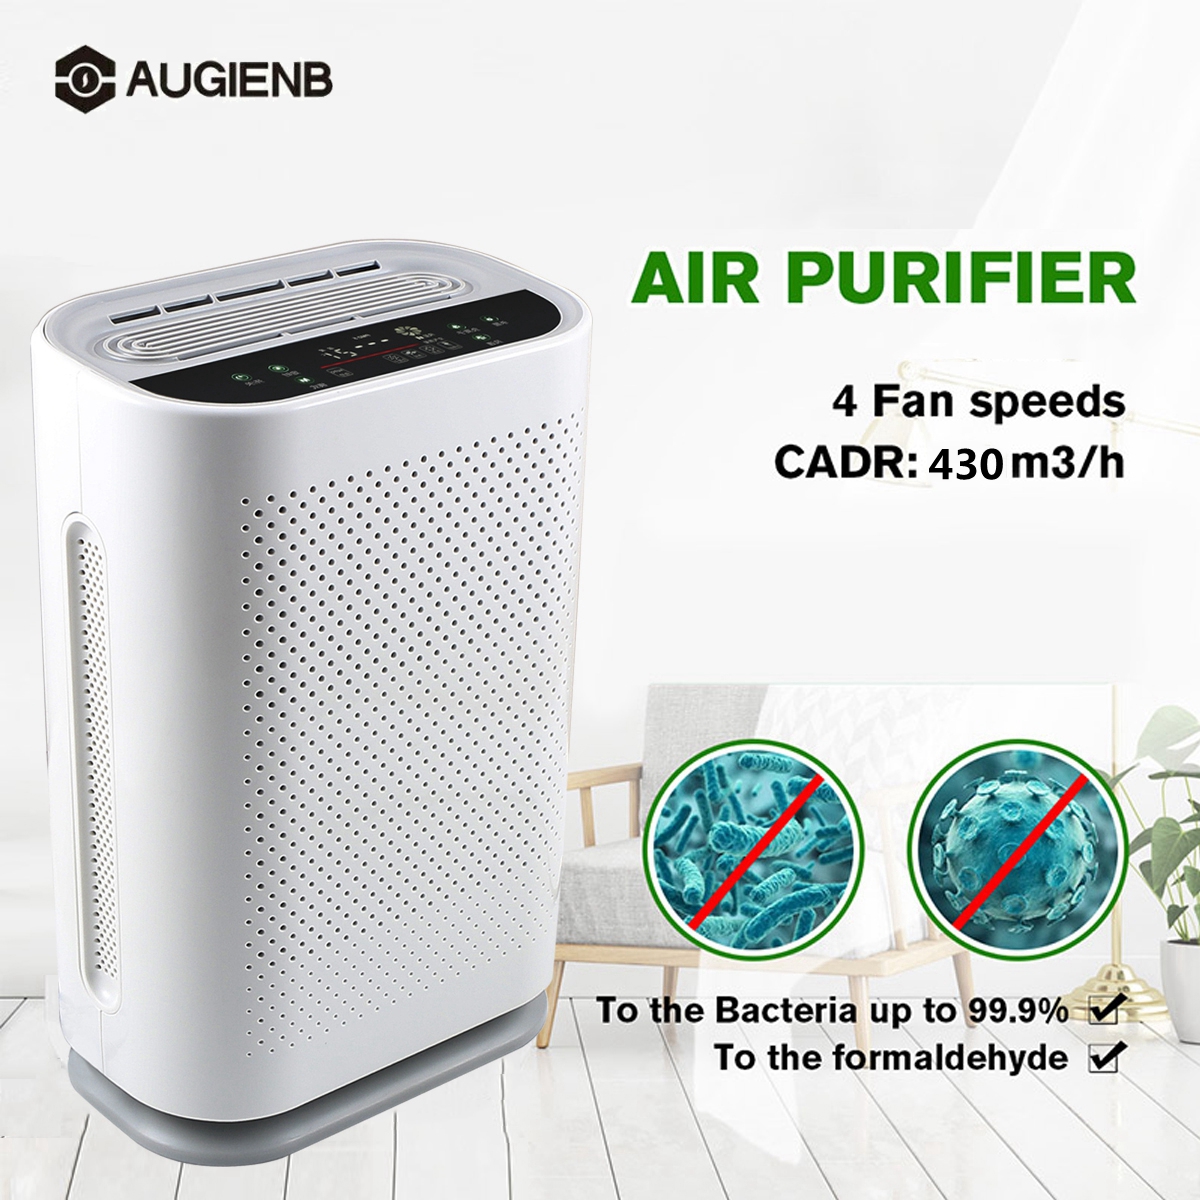 AUGIENB-Smart-Sensor-Air-Purifier-for-Home-Large-Room-With-True-HEPA-Filter-To-Remove-Smoke-Dust-Mol-1710011-1